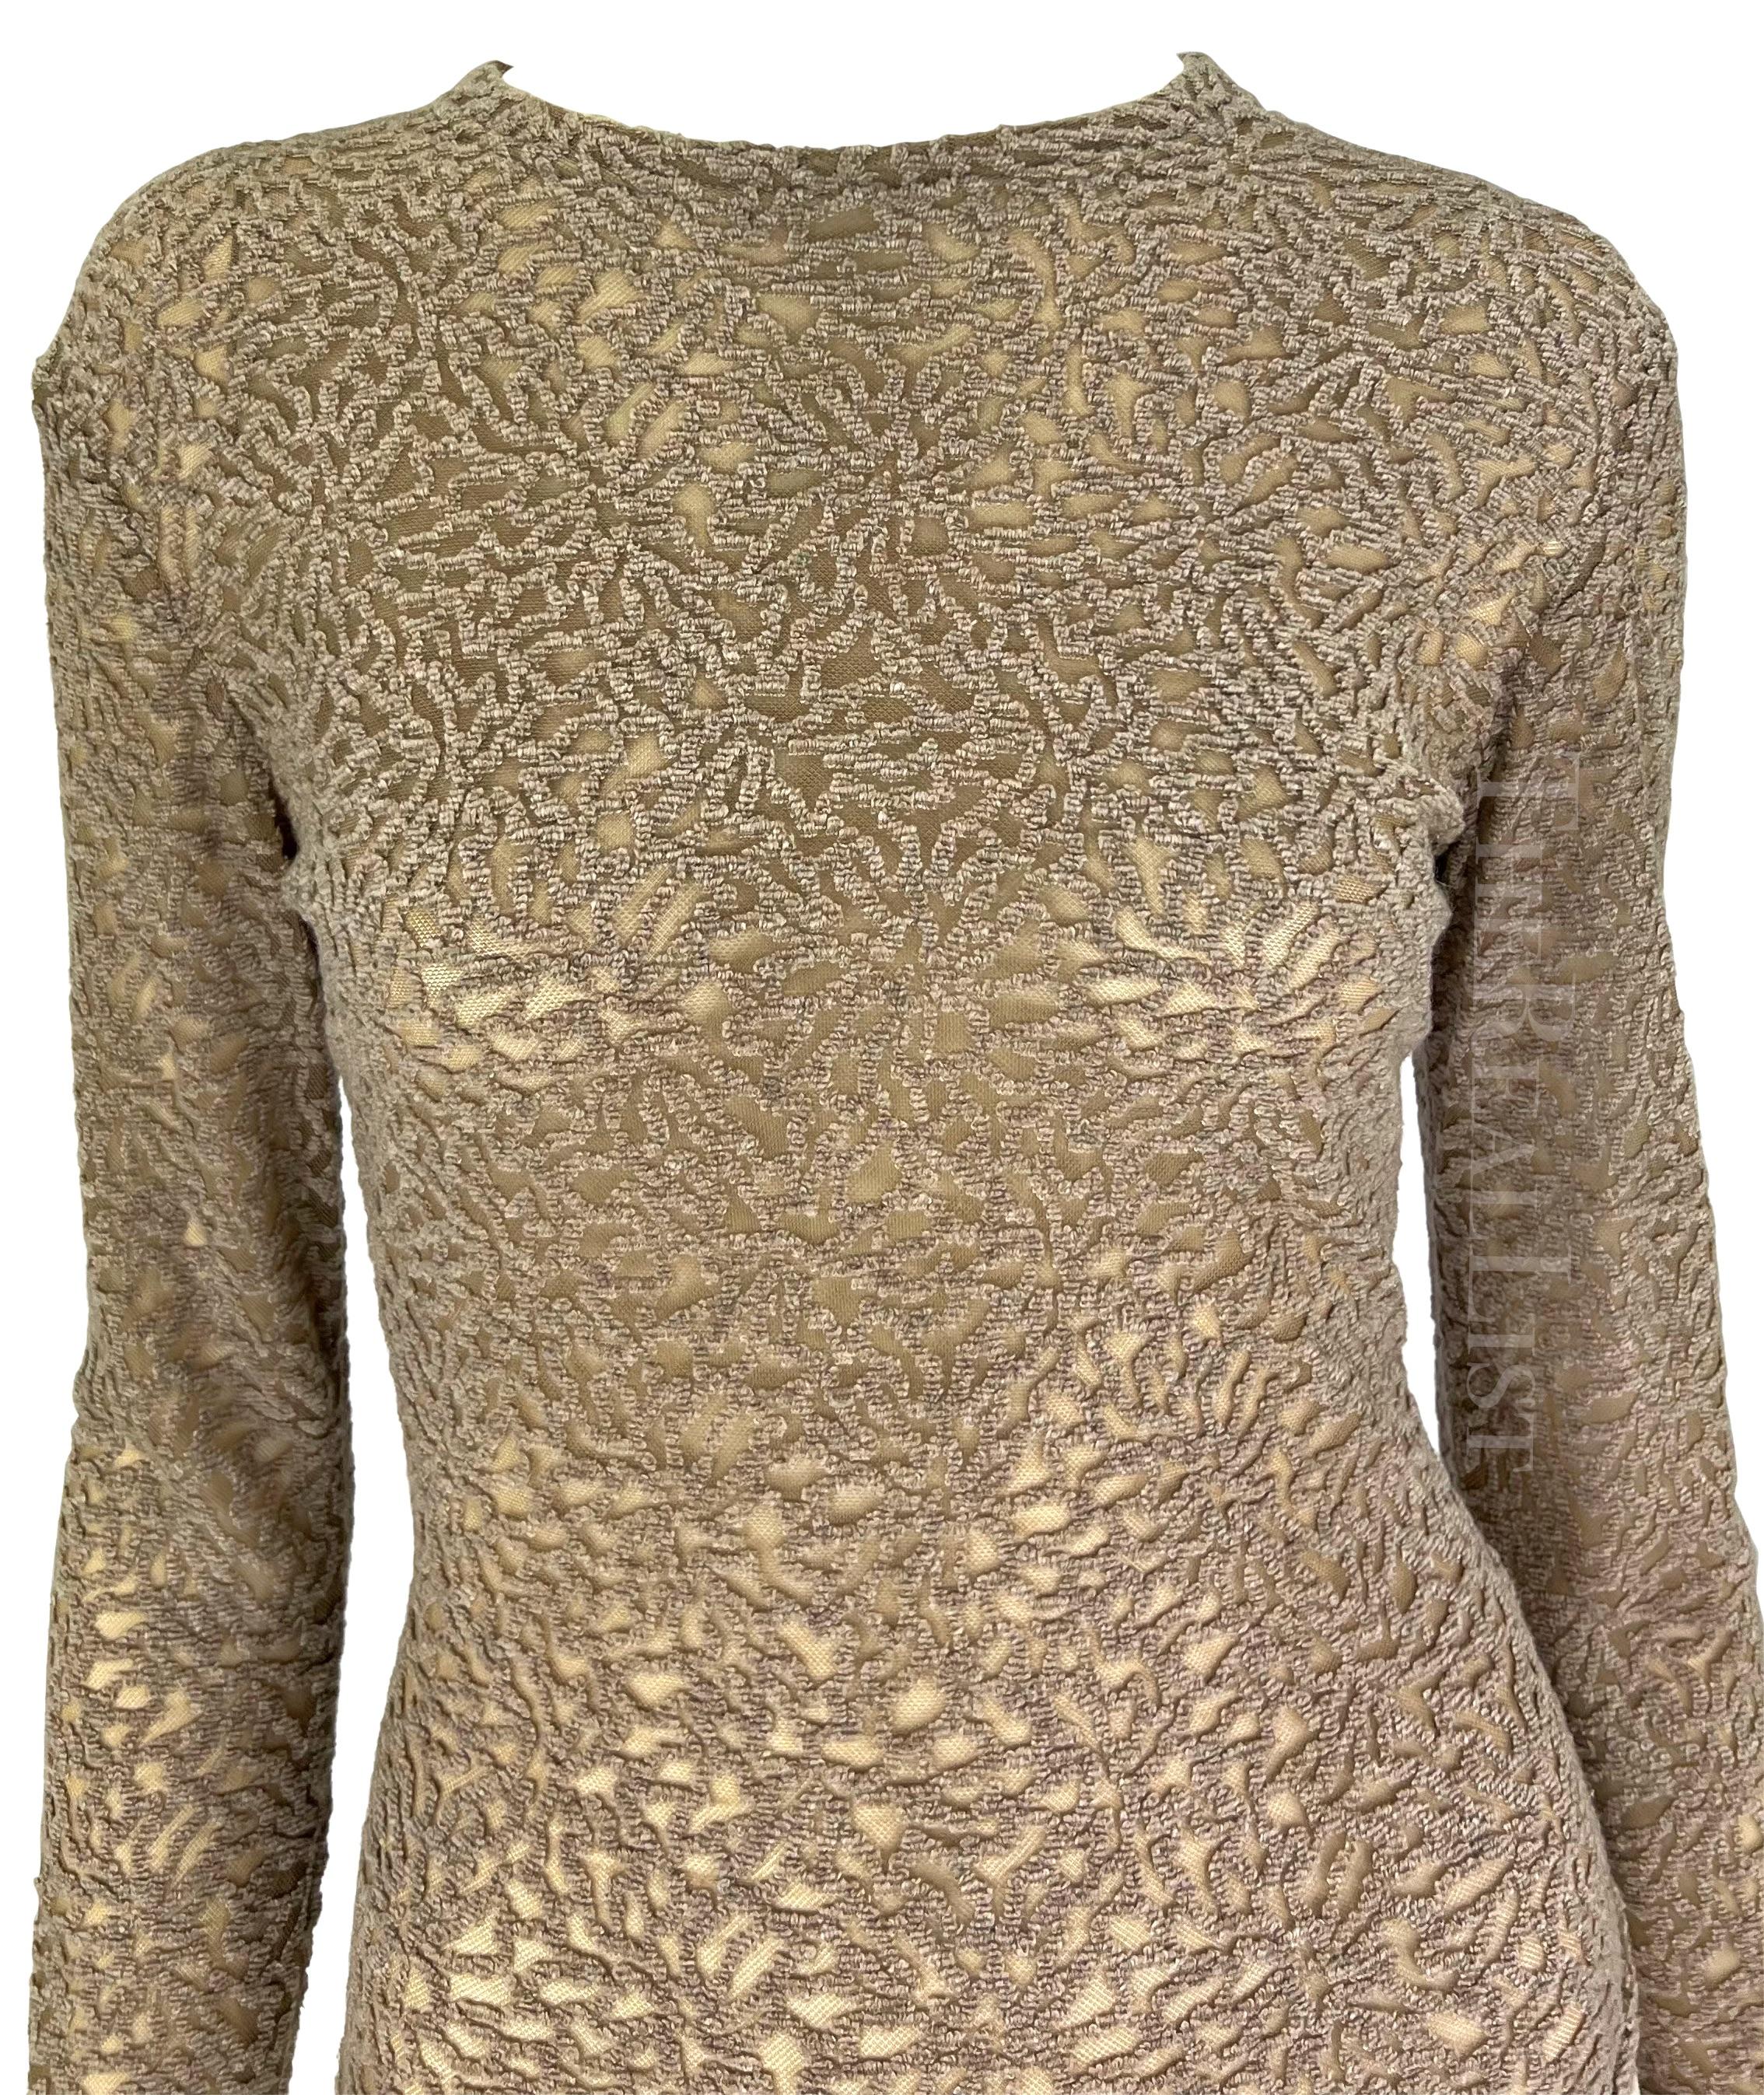 TheRealList presents: a semi-sheer bodysuit designed, by Gianni Versace. From the 1990s, the pattern is applied to sheer fabric in boucle yarn to create a velvet-like texture. Easy to dress up or down, this piece is the perfect chic addition to any